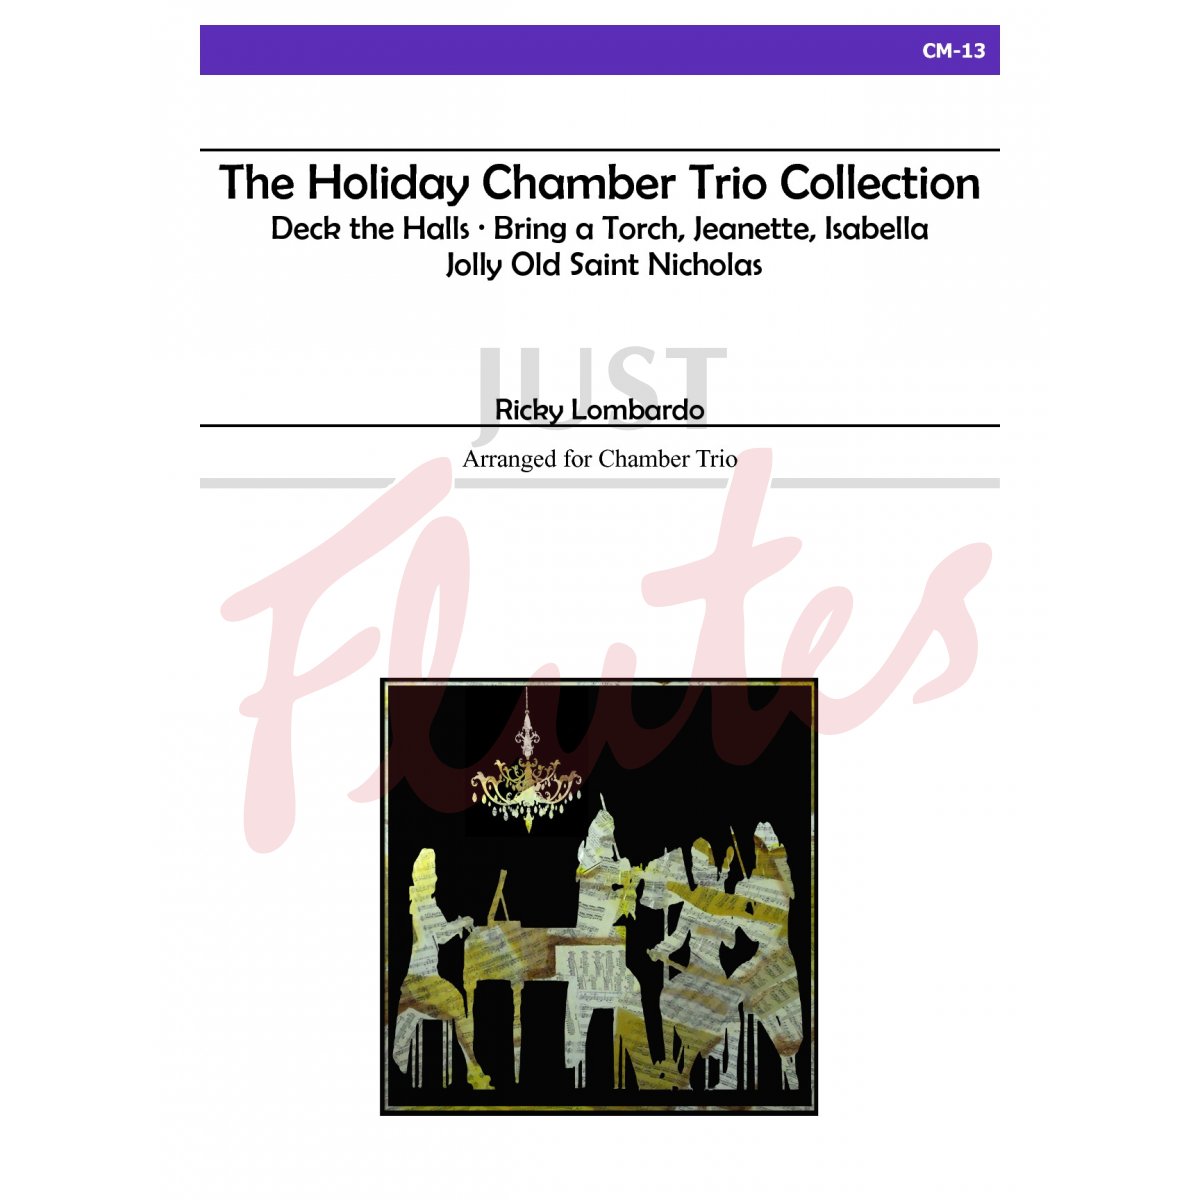 The Holiday Chamber Trio Collection